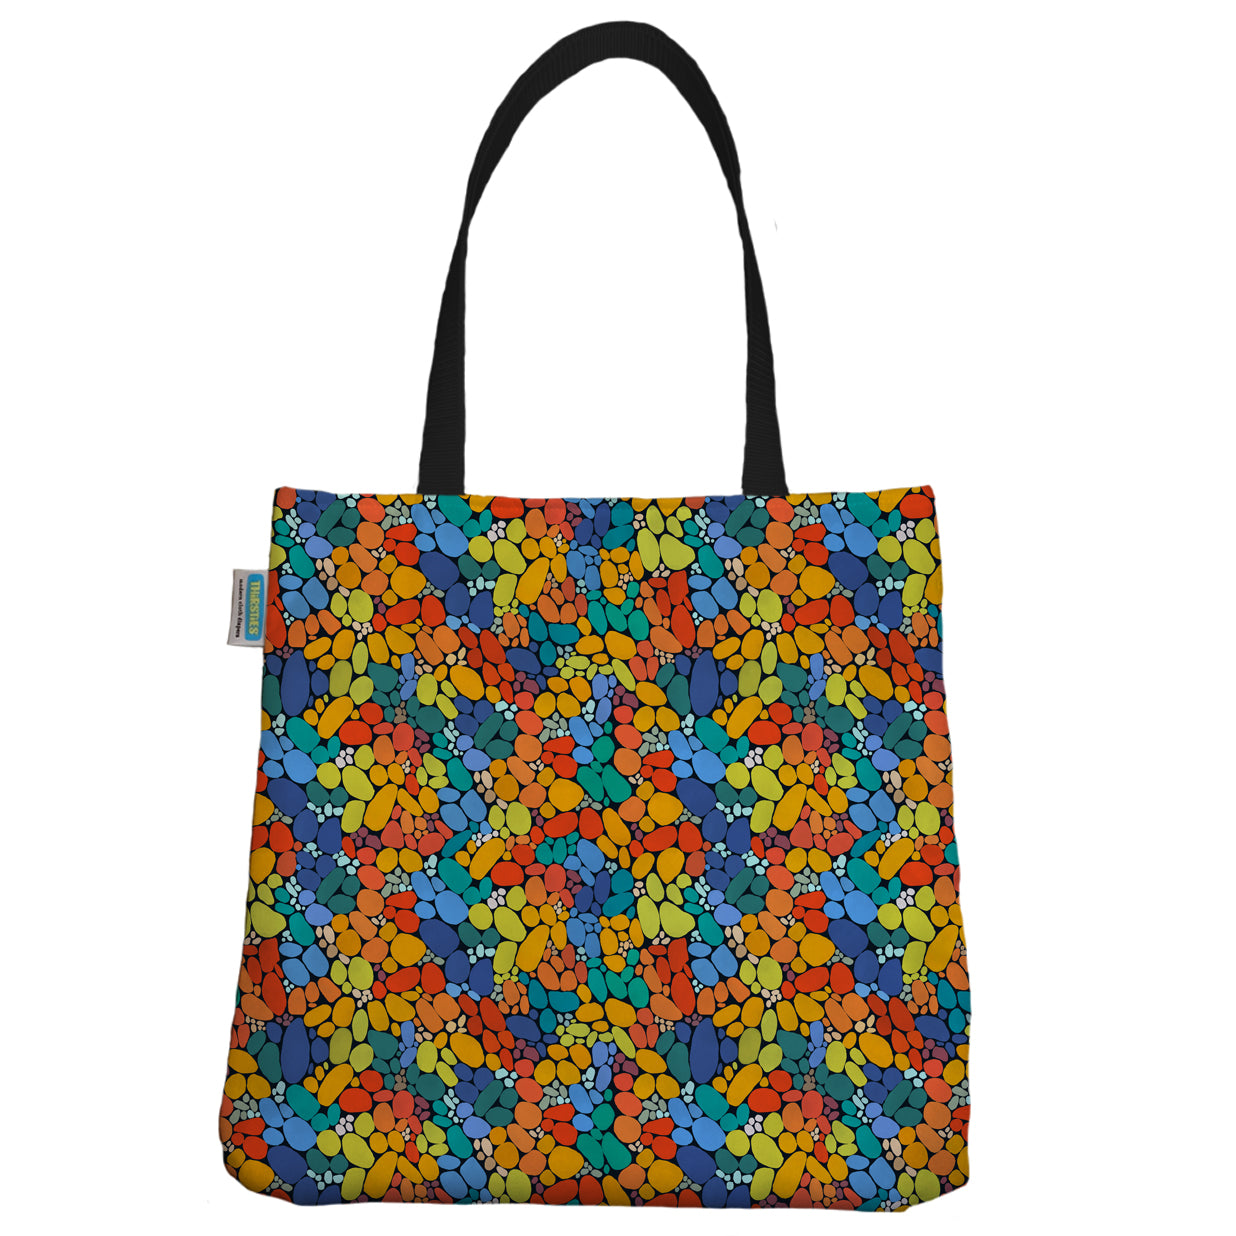 Outlet Simple Tote Bag - Stepping Stones